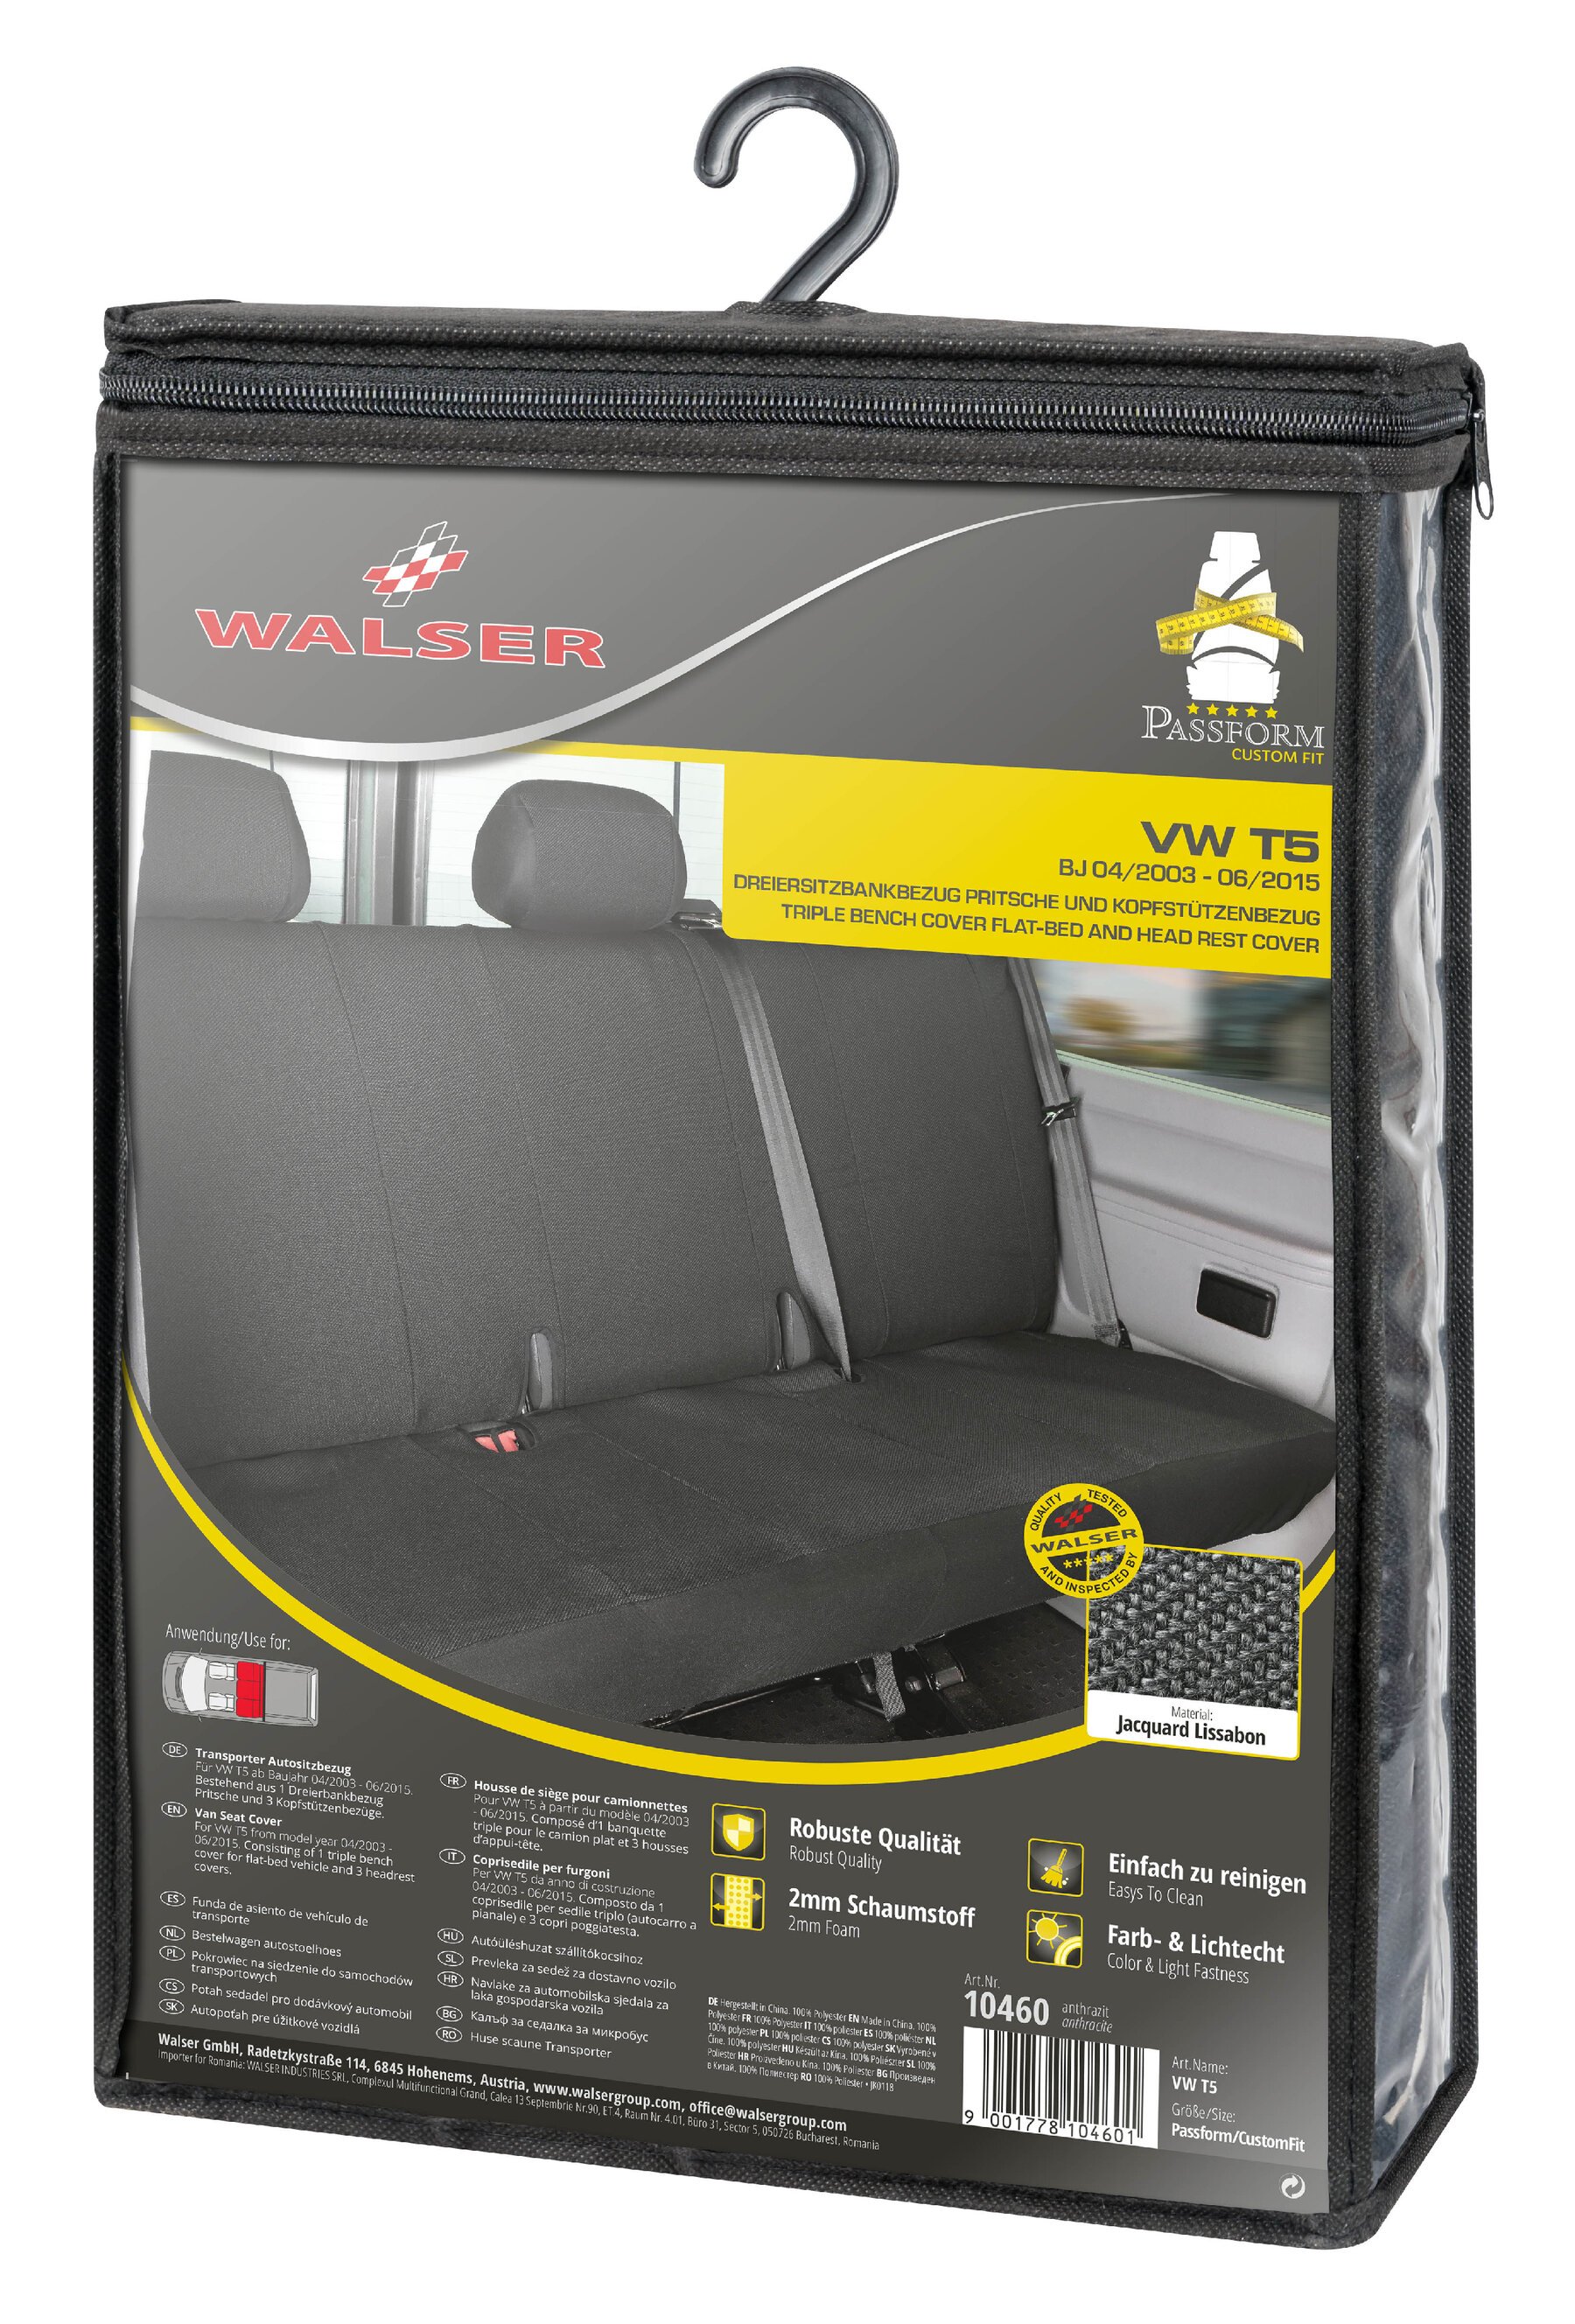 Seat cover made of fabric for VW T5, 3-seater bench cover platform